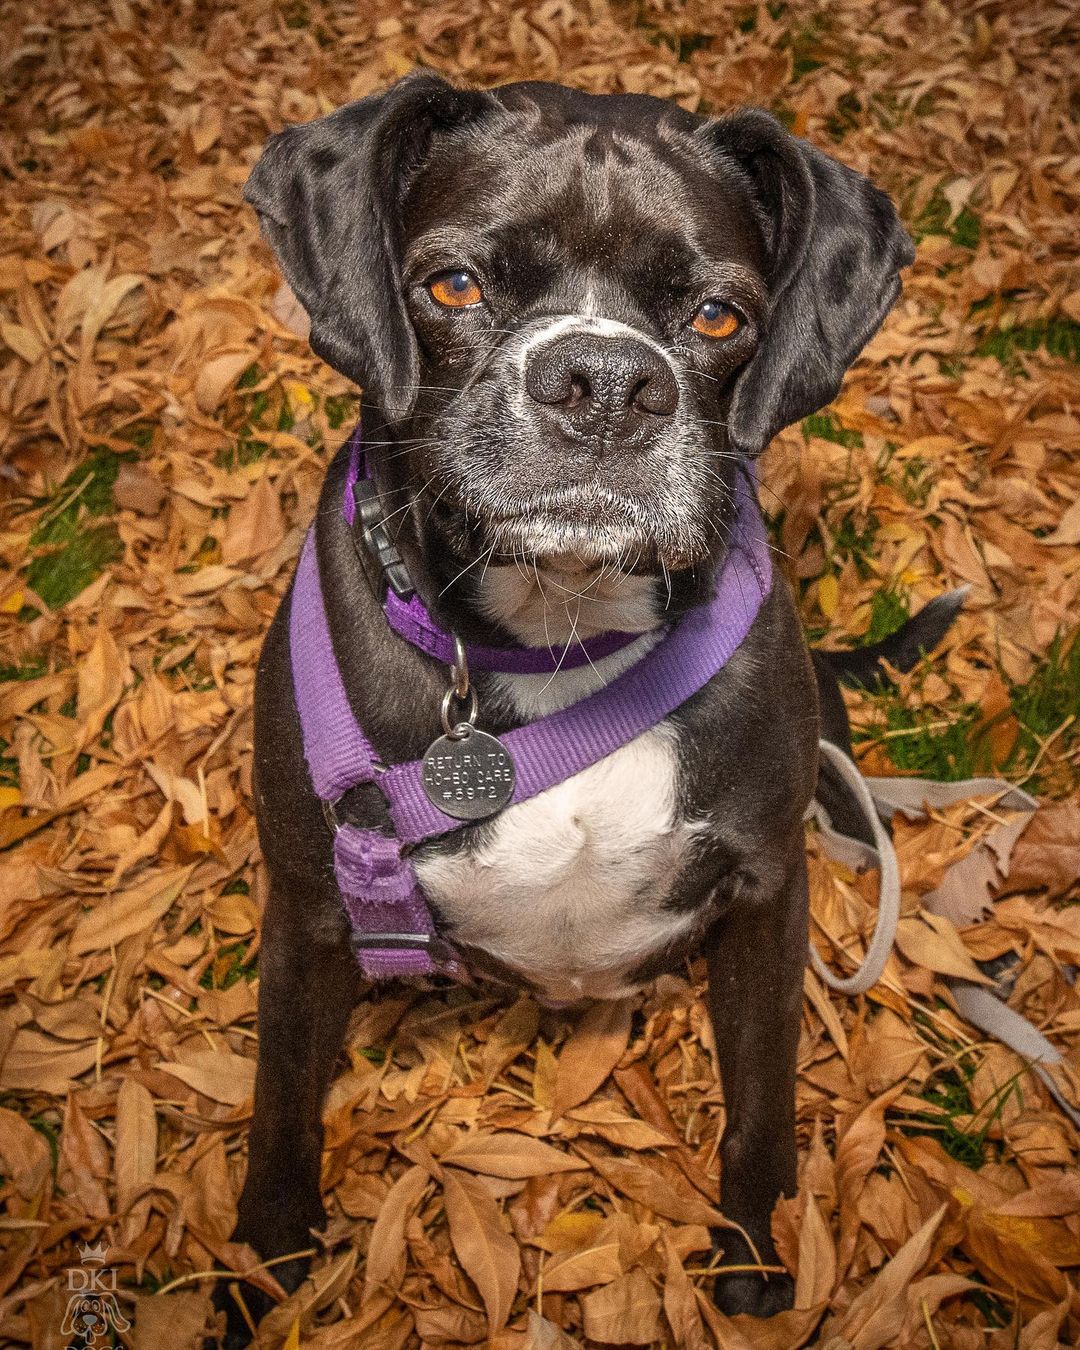 Lexi needs a home!! <a target='_blank' href='https://www.instagram.com/explore/tags/hobocareboxerrescue/'>#hobocareboxerrescue</a> <a target='_blank' href='https://www.instagram.com/explore/tags/adoptdontshop/'>#adoptdontshop</a> <a target='_blank' href='https://www.instagram.com/explore/tags/littleblackdog/'>#littleblackdog</a> 📸@dkidogs